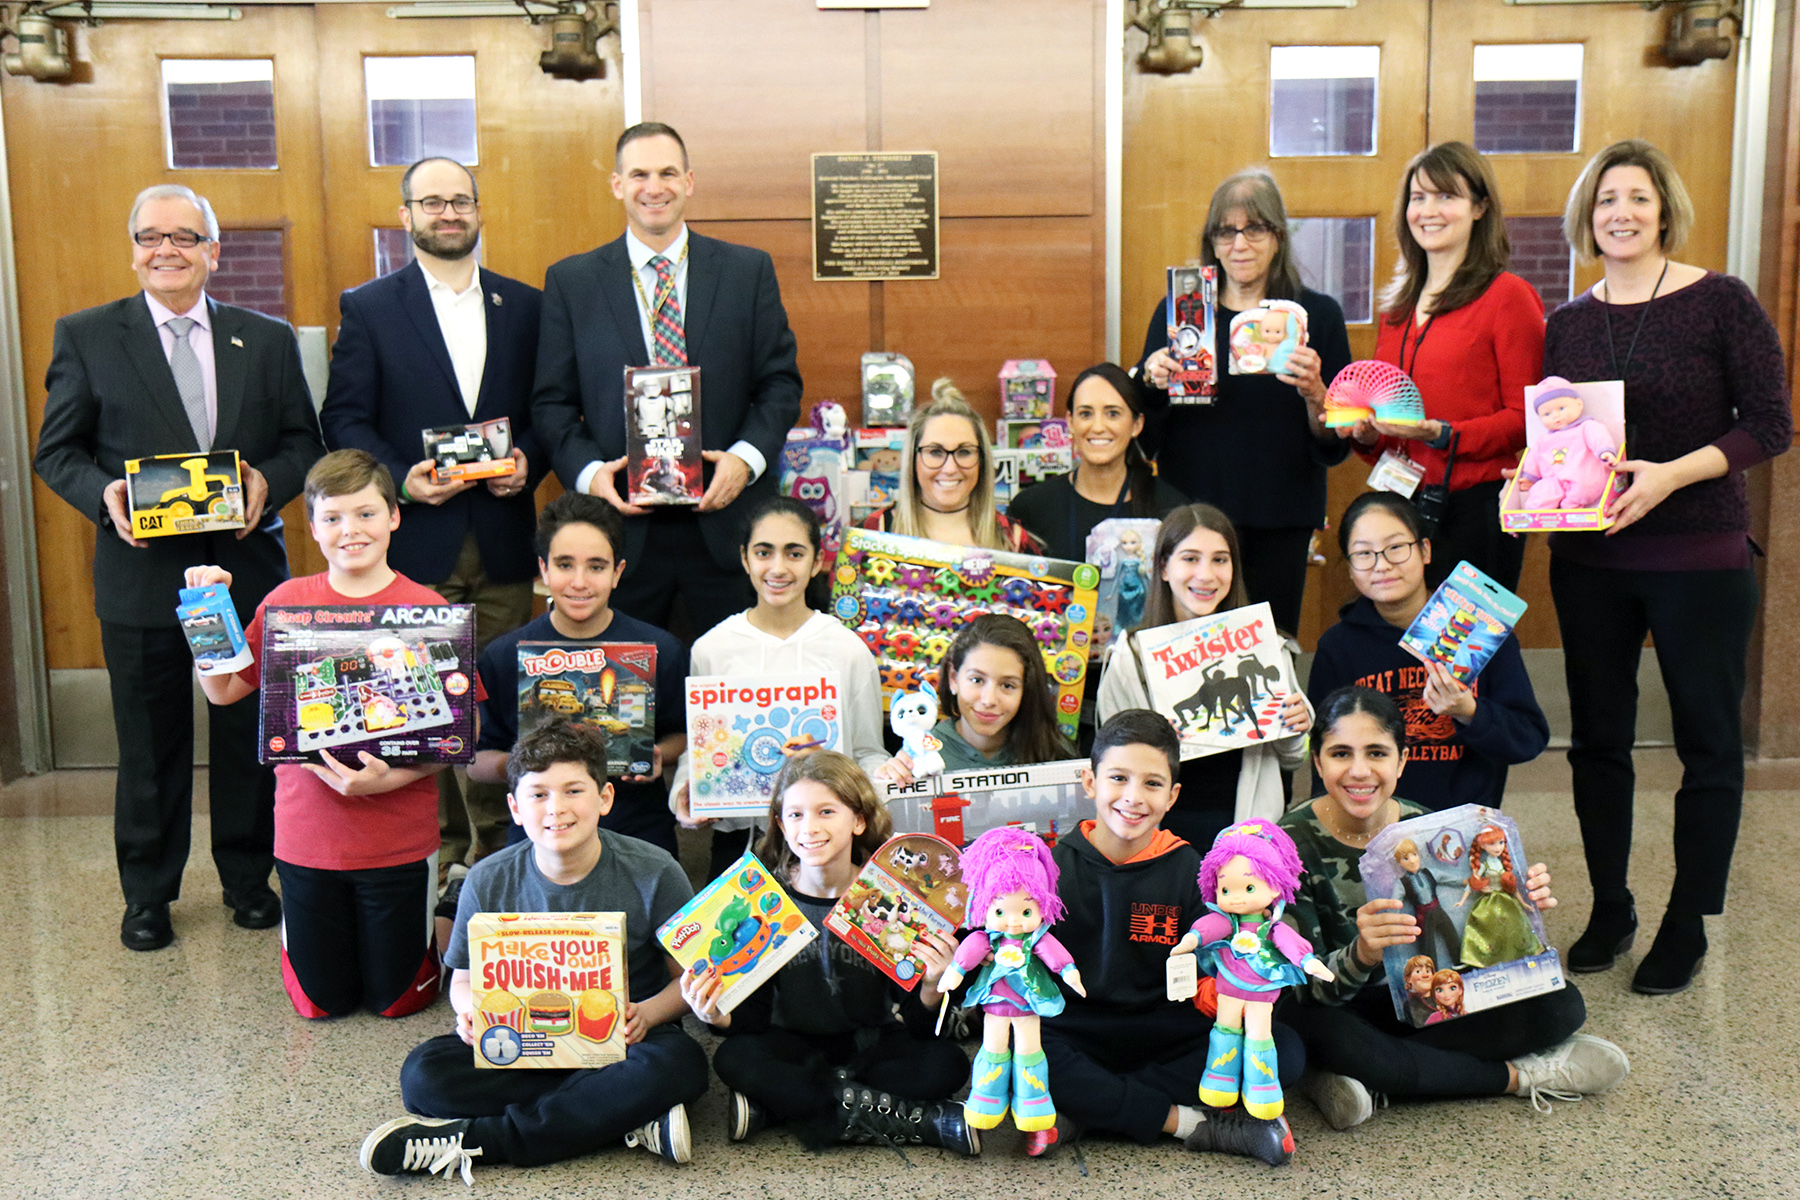 Representatives of the student council are pictured here with Assemblyman Anthony D’Urso and Assemblyman Ed Ra, Principal Gerald Cozine, and student council advisors Rachael Weissman, Michelle Sicurella, and Betty Brody, and Assistant Principals Nancy Gunning and Jennifer Andersen. Student council advisor Michael Noberto is not pictured. (Photo courtesy of the Great Neck Public Schools)